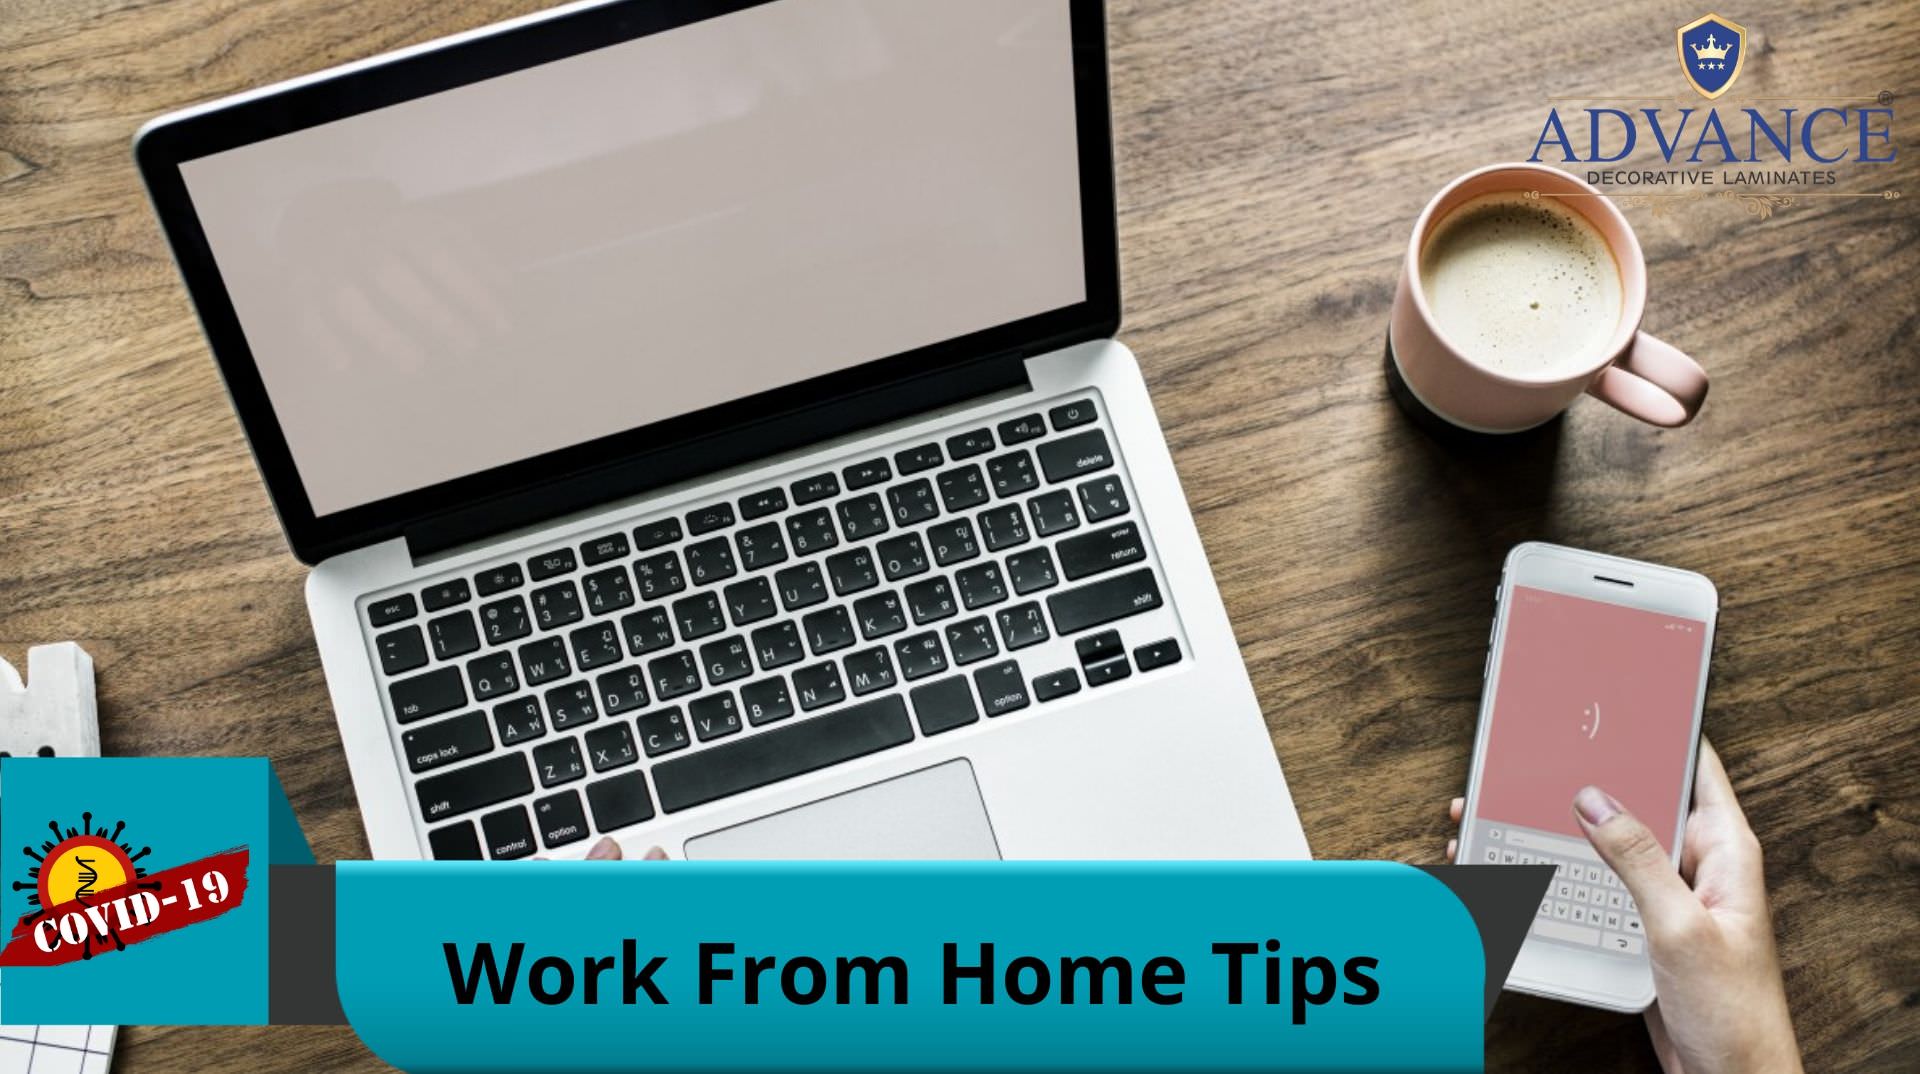 Coronavirus and Home Office Hacks – Easy Tips to make working from home